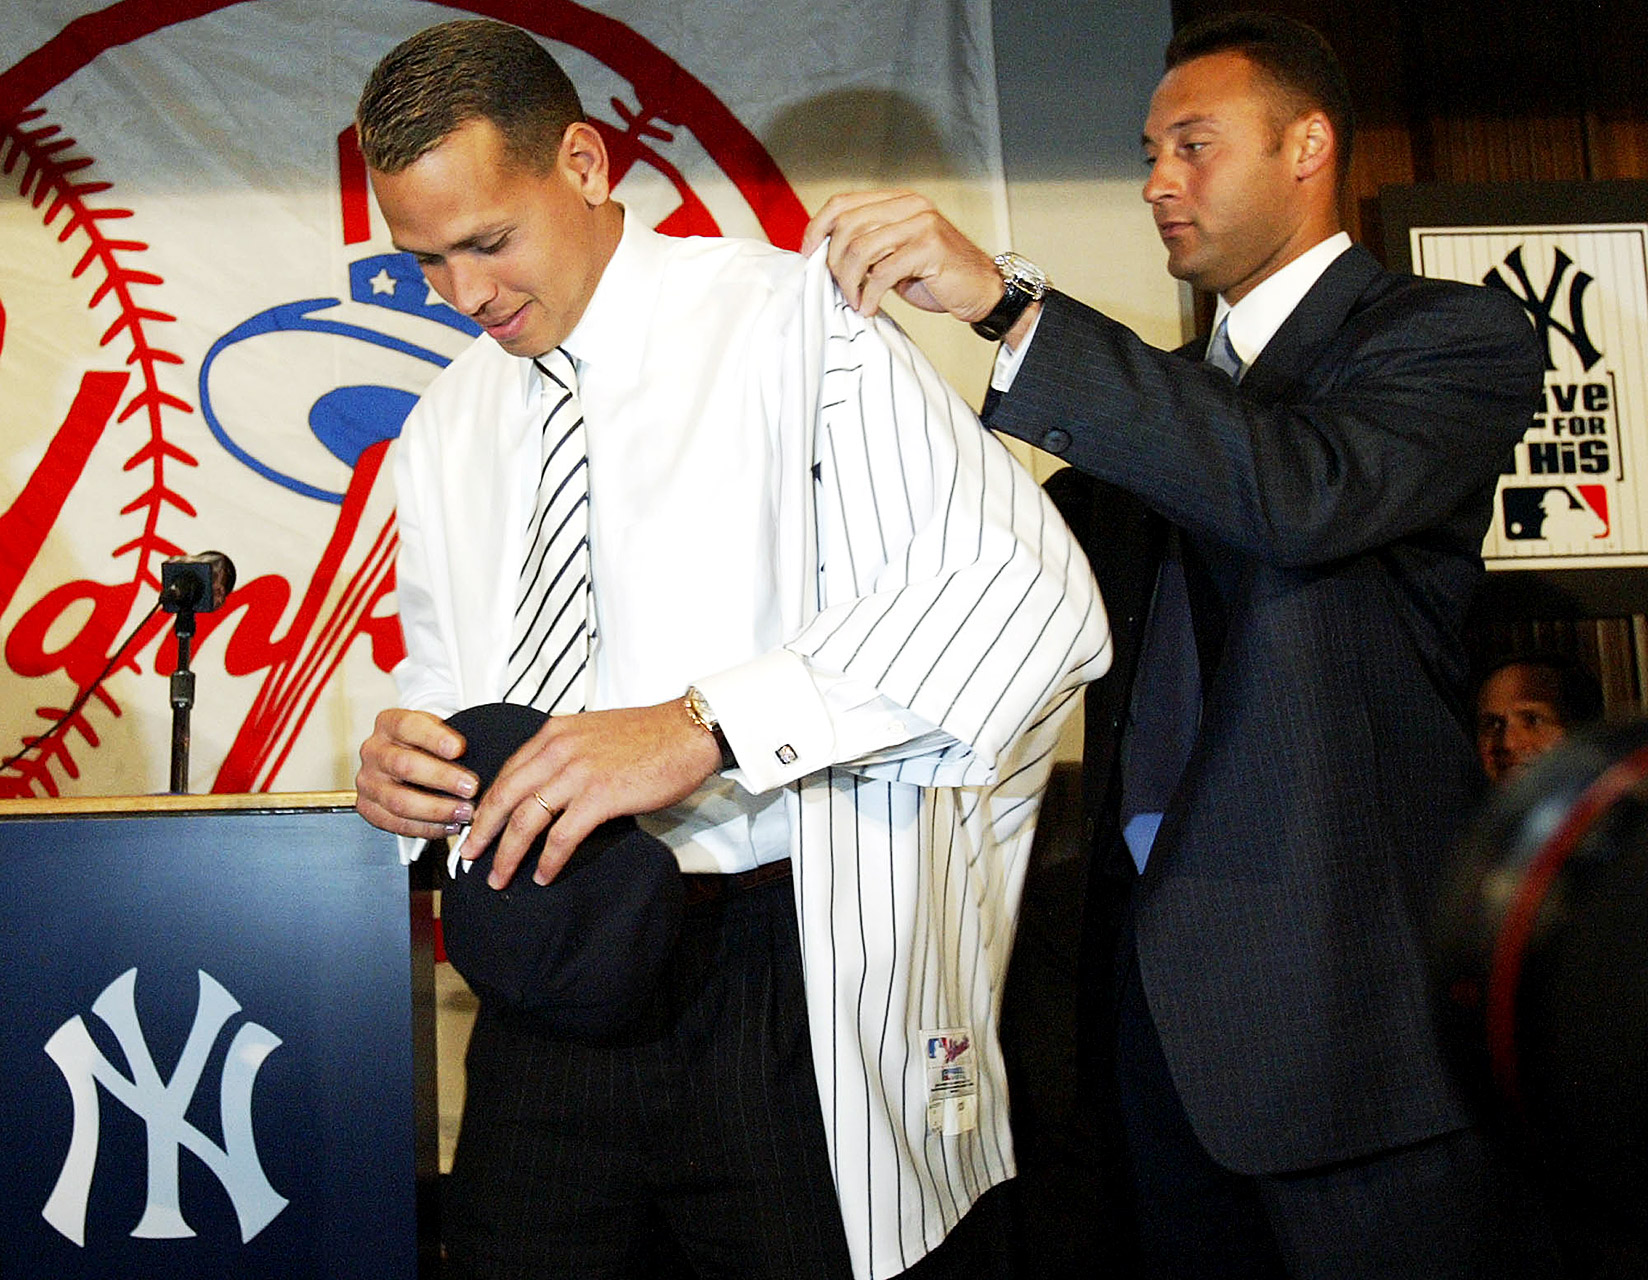 A-Rod's Arrival in the Bronx - A-Rod's Highs and Lows: The complicated  career of Alex Rodriguez - ESPN